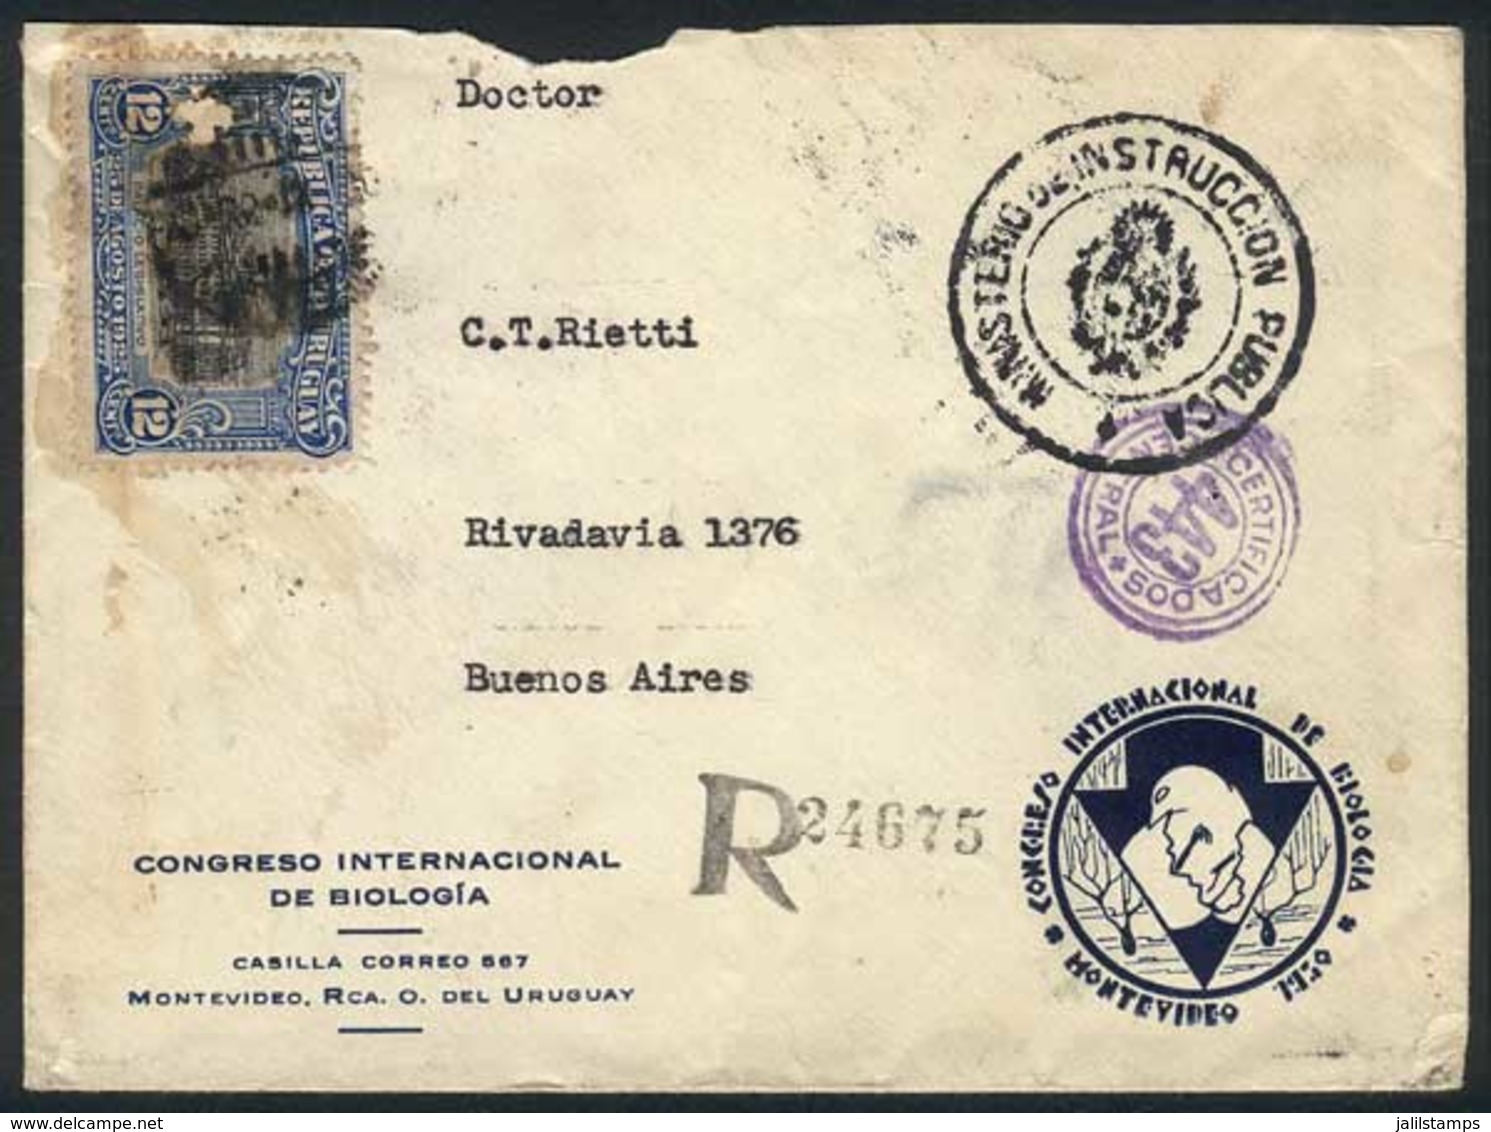 URUGUAY: Cover With Printed Address Of Intl. Congress Of Biology Sent To Argentina By Registered Mail On 20/SE/1930, Fra - Uruguay